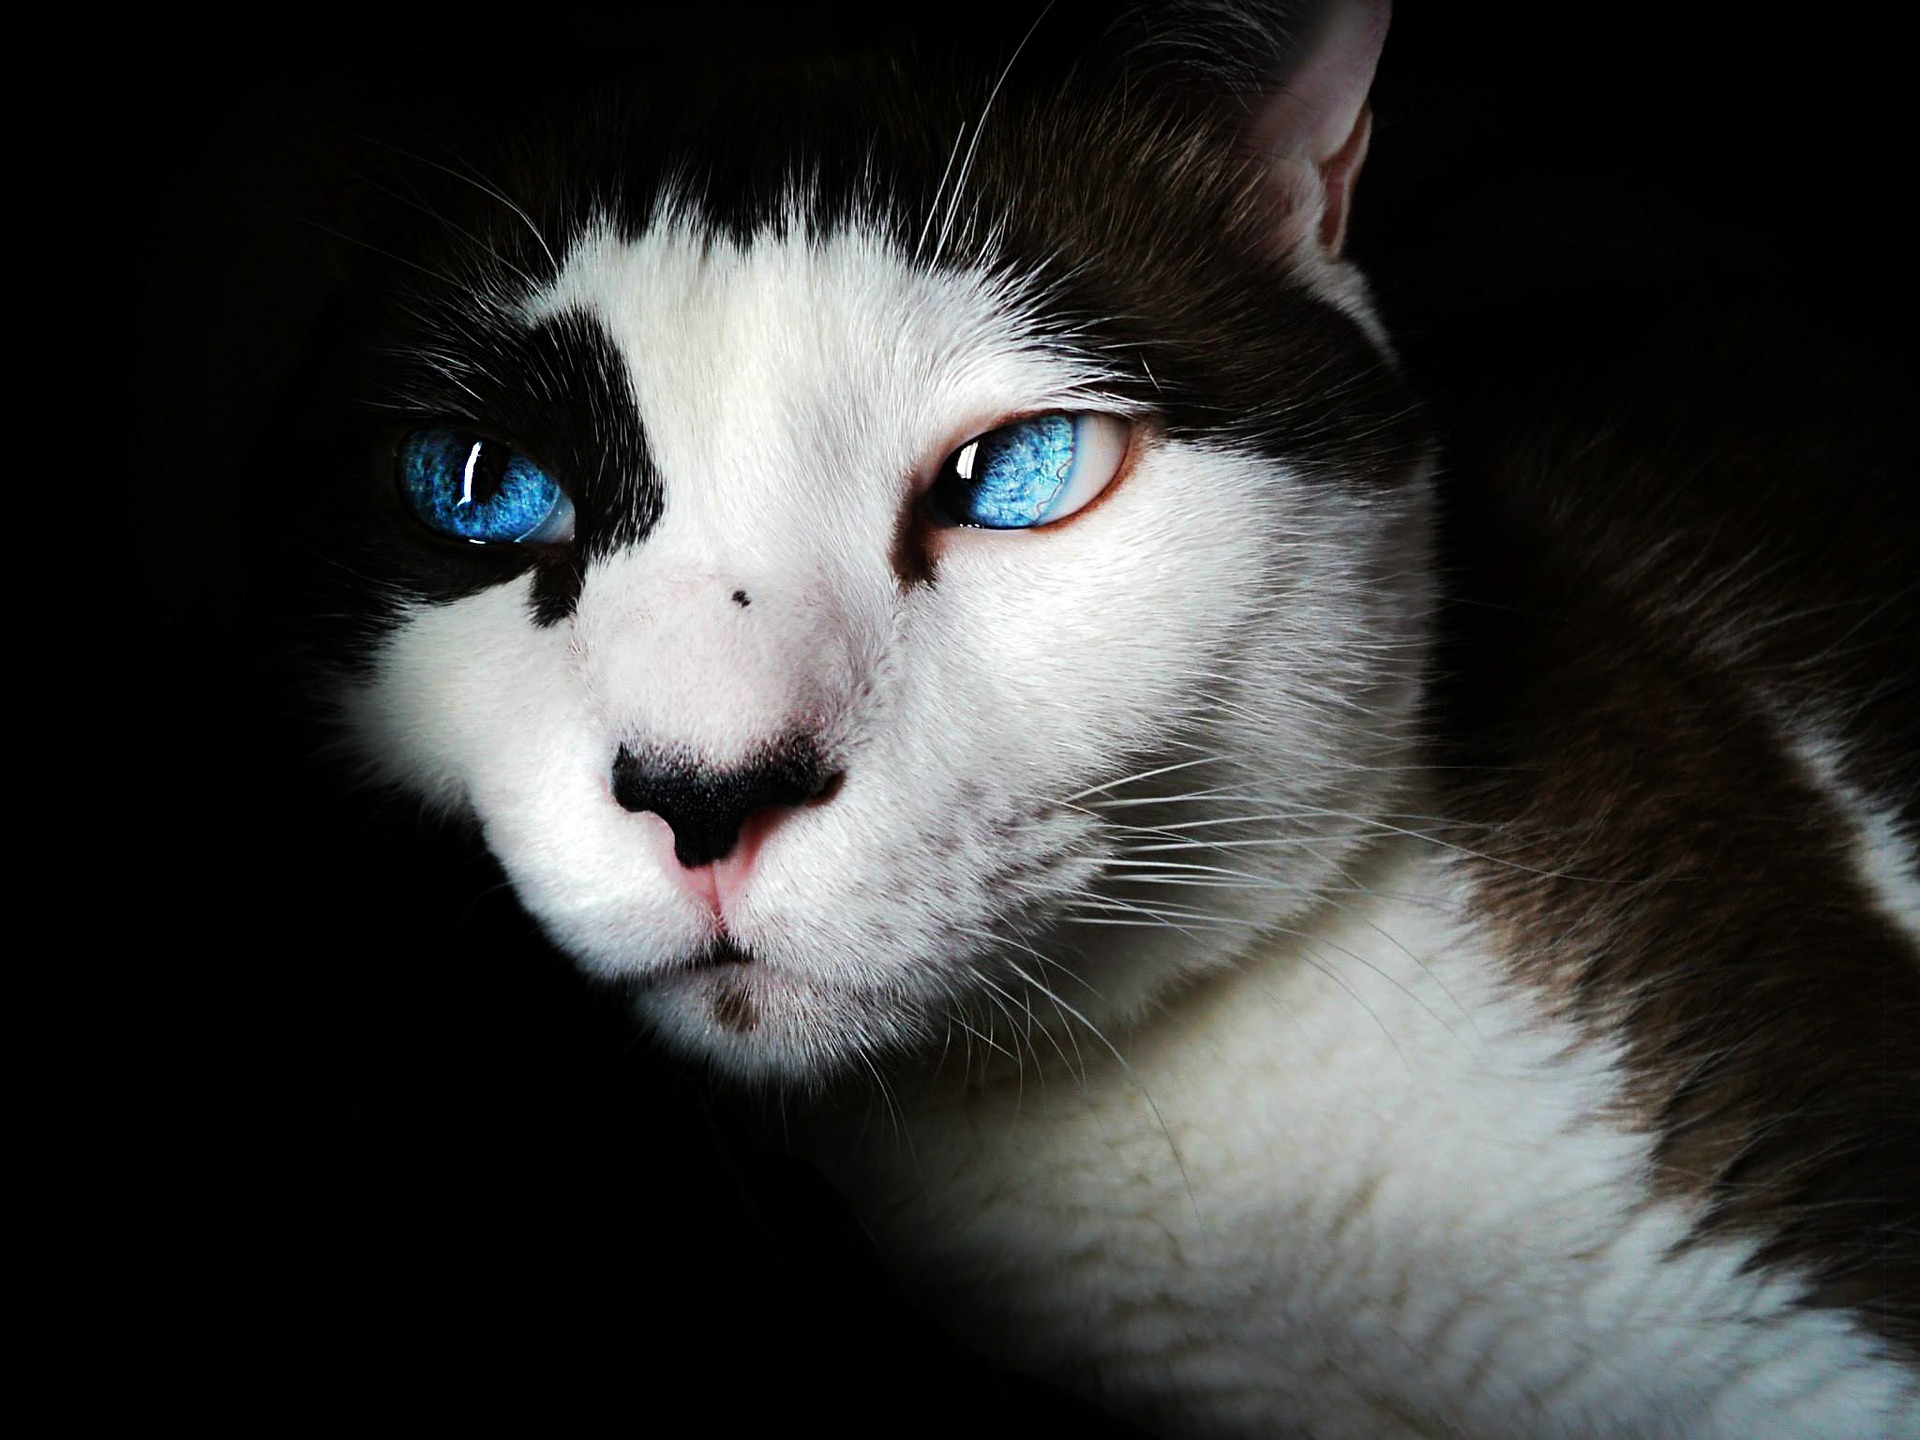 A black and white cat with blue eyes